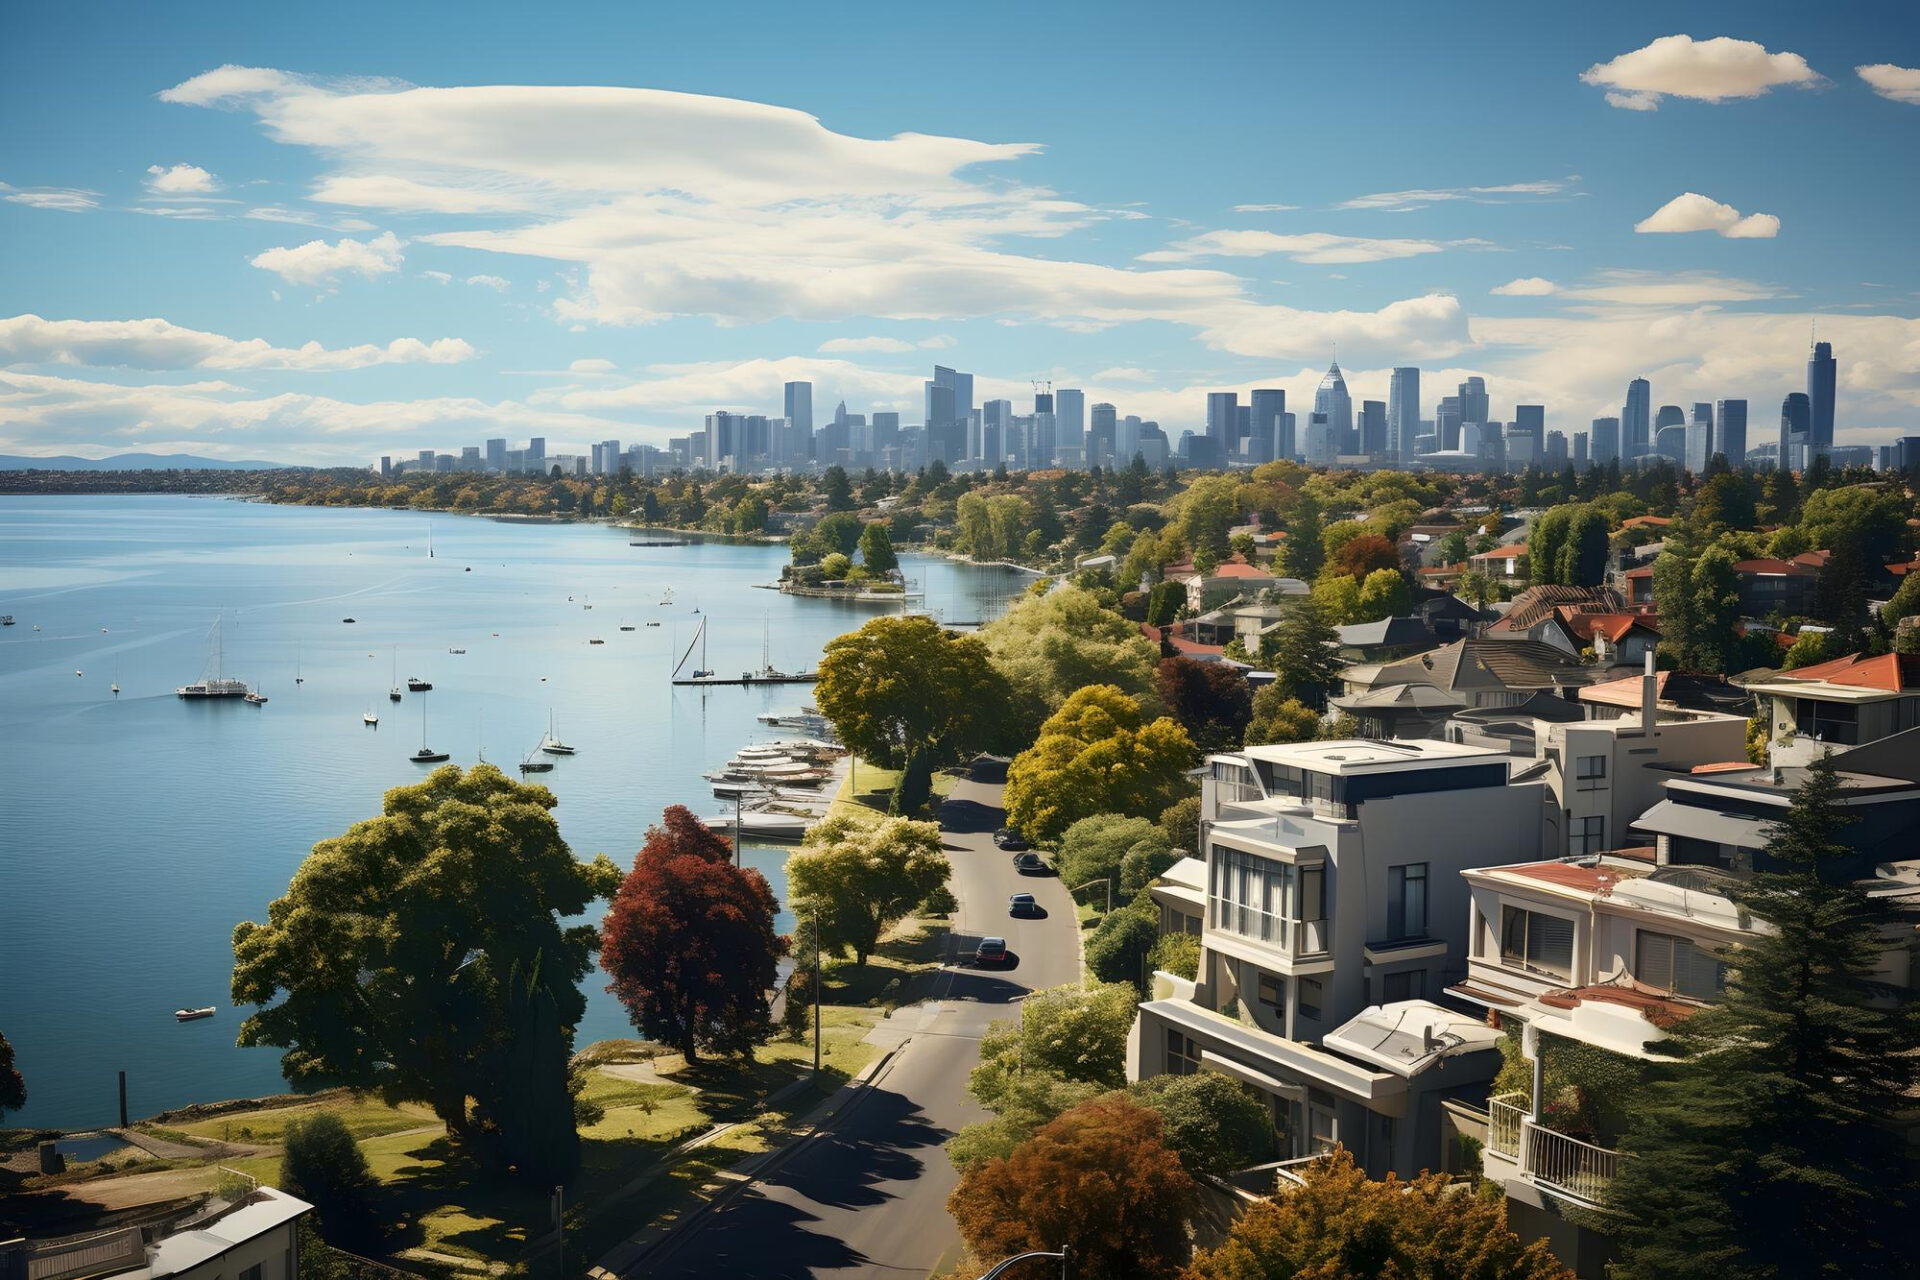 A stunning view of an Australian coastal town on a sunny day.